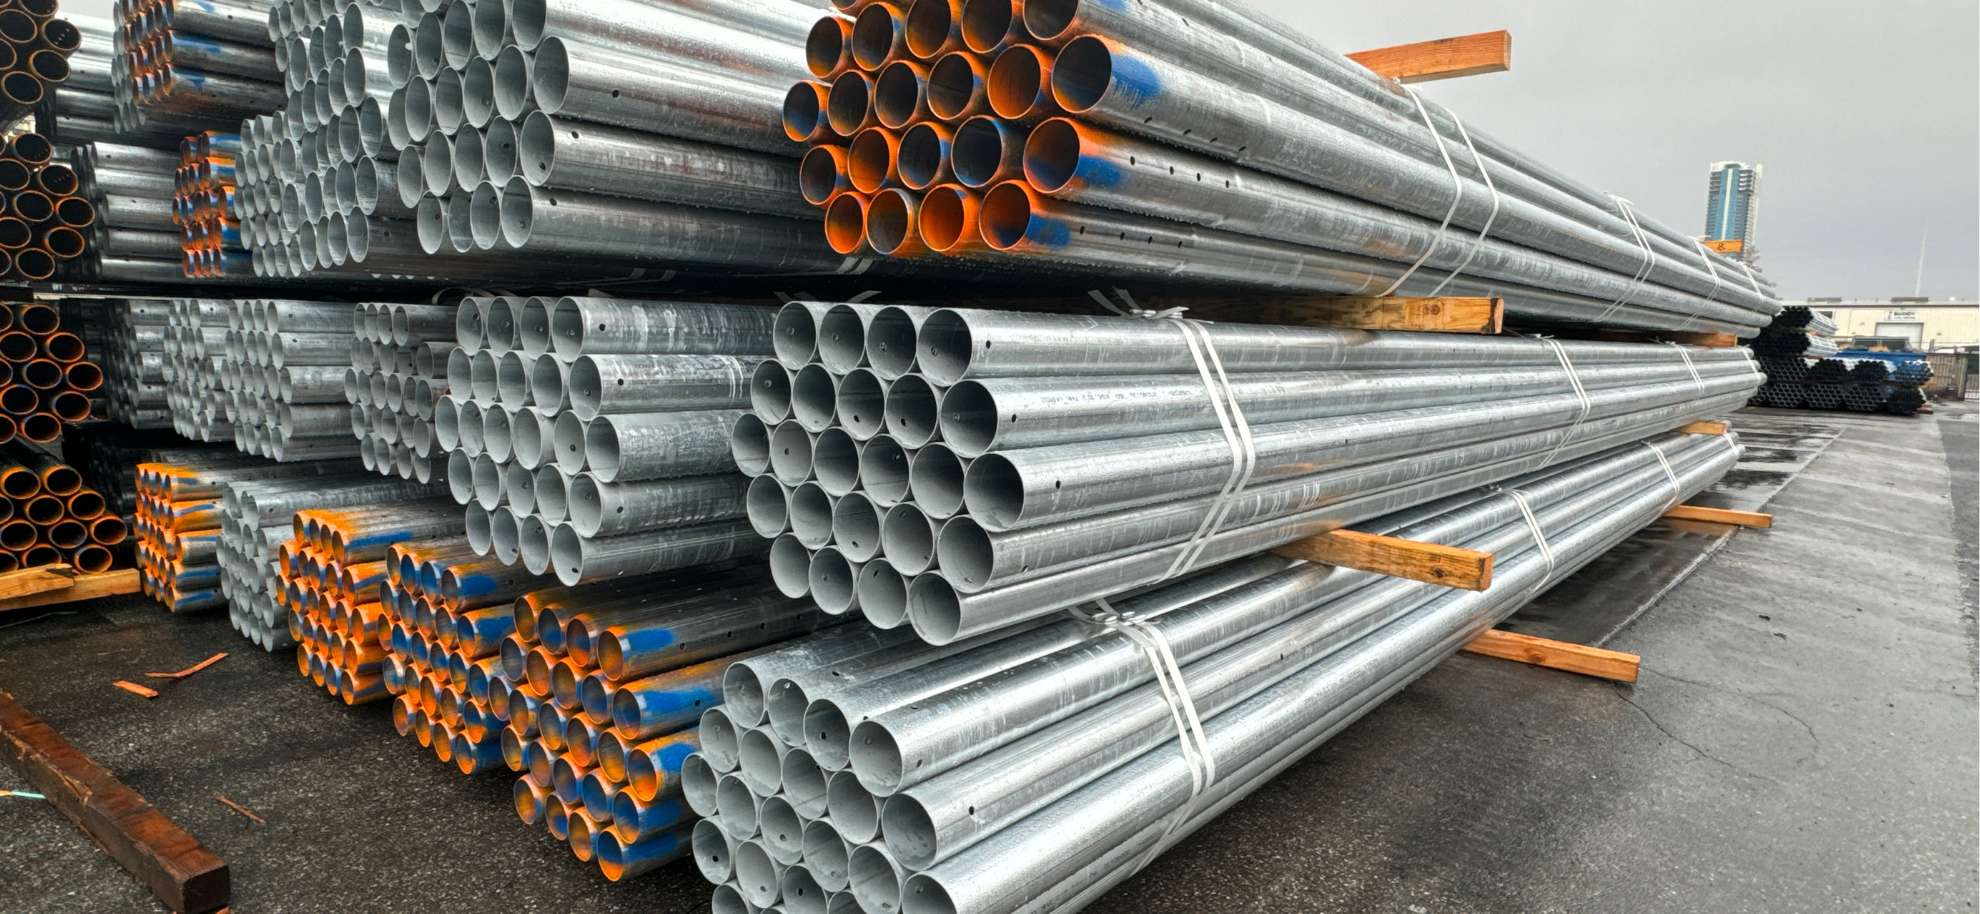 Unimacts is a leading manufacturer of steel pipes for the solar industry